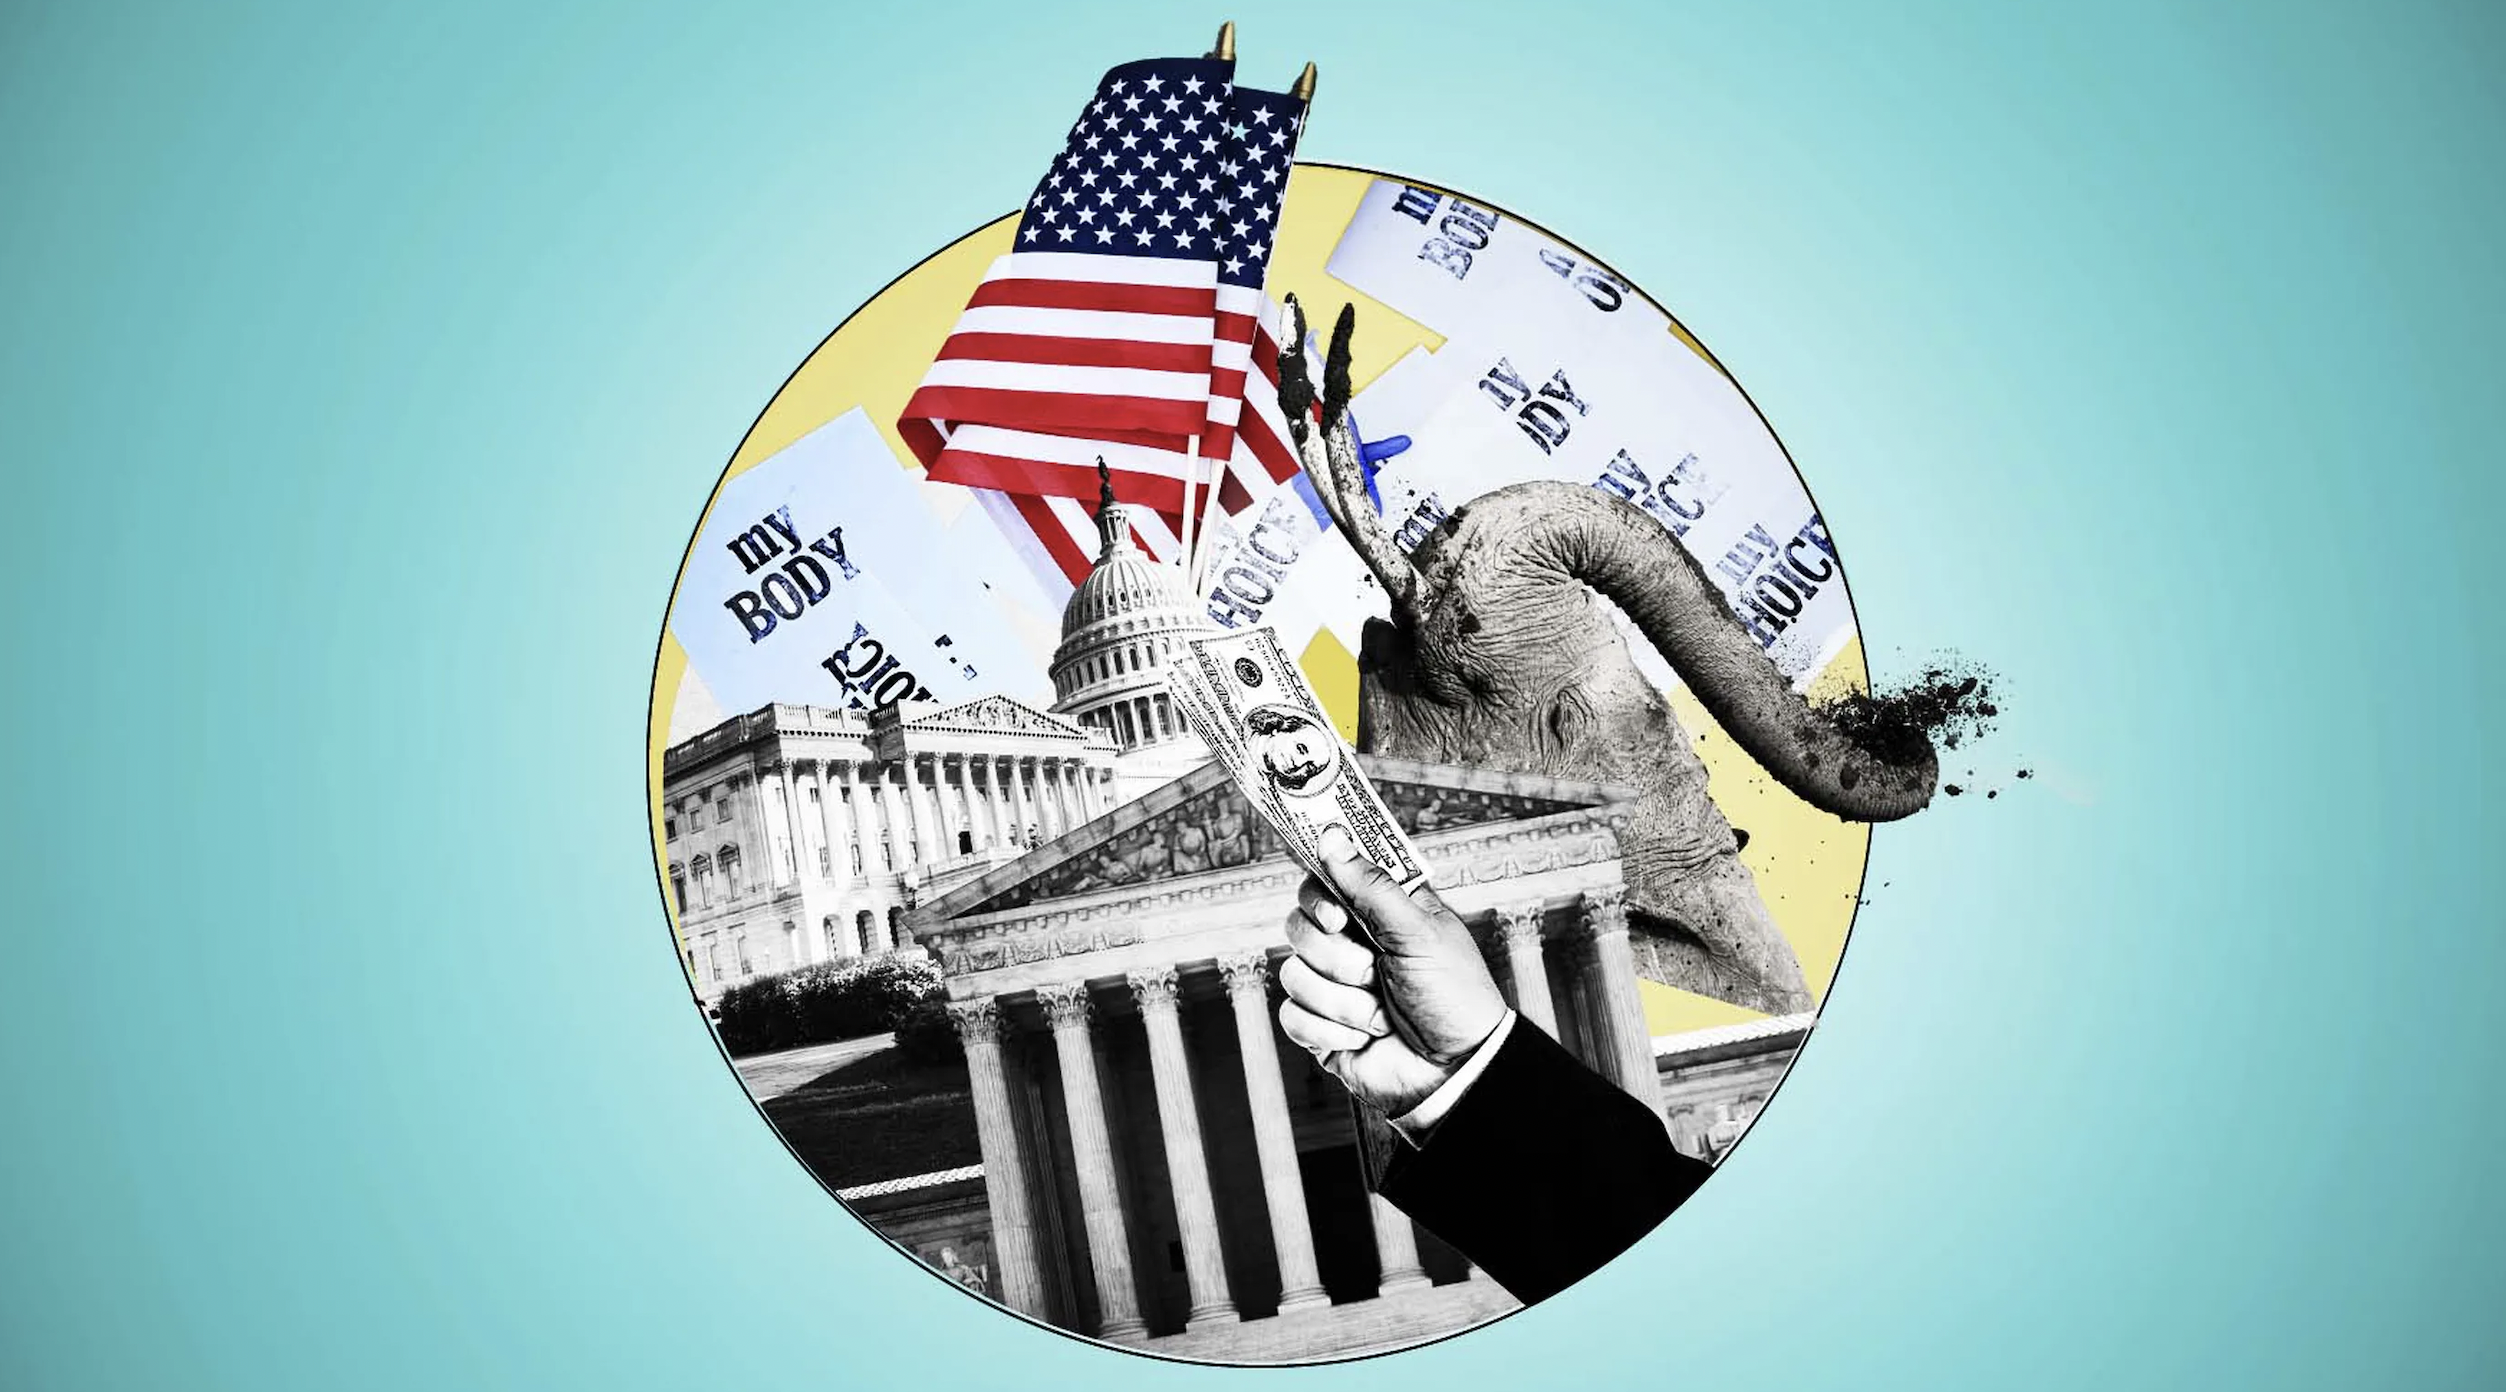 A graphic shows a collage of election-related images; a hand pointing, a waving flag, the Supreme Court builiding, an elephant, and an abortion rights sign saying “My body, my choice.”